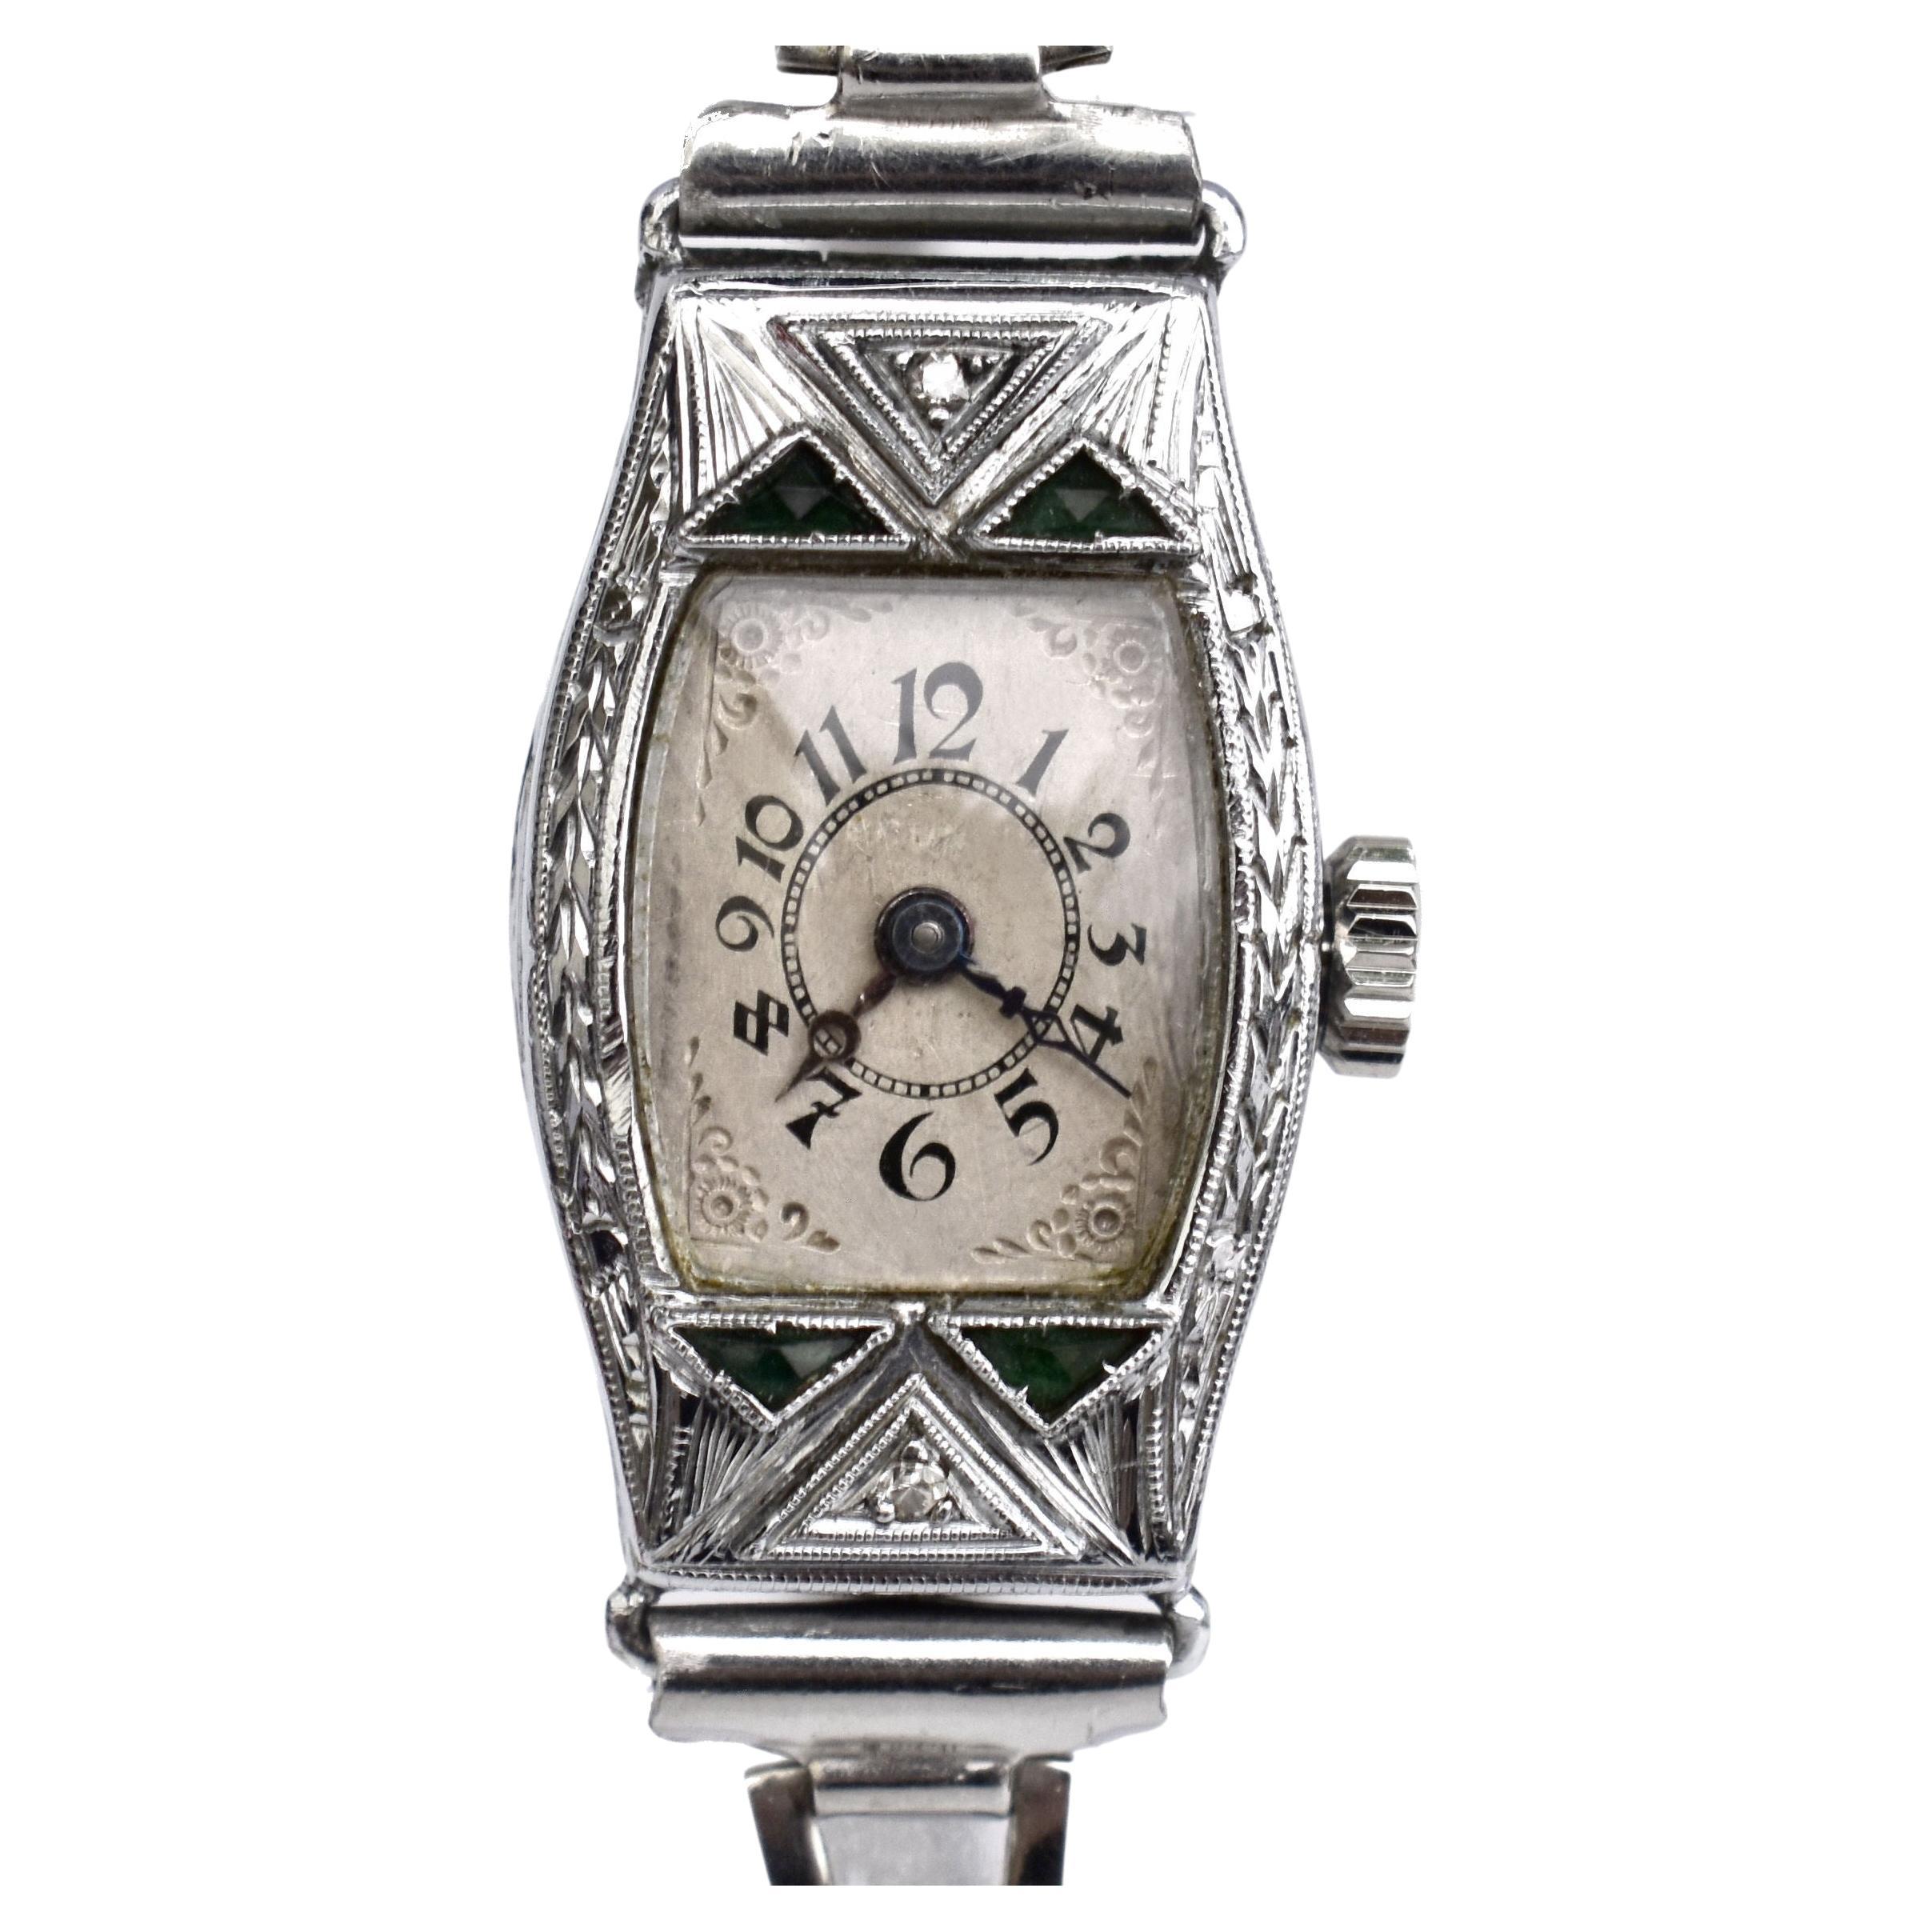 Art Deco Ladies White Gold Filled Manual Watch with Emeralds, Serviced, C1928